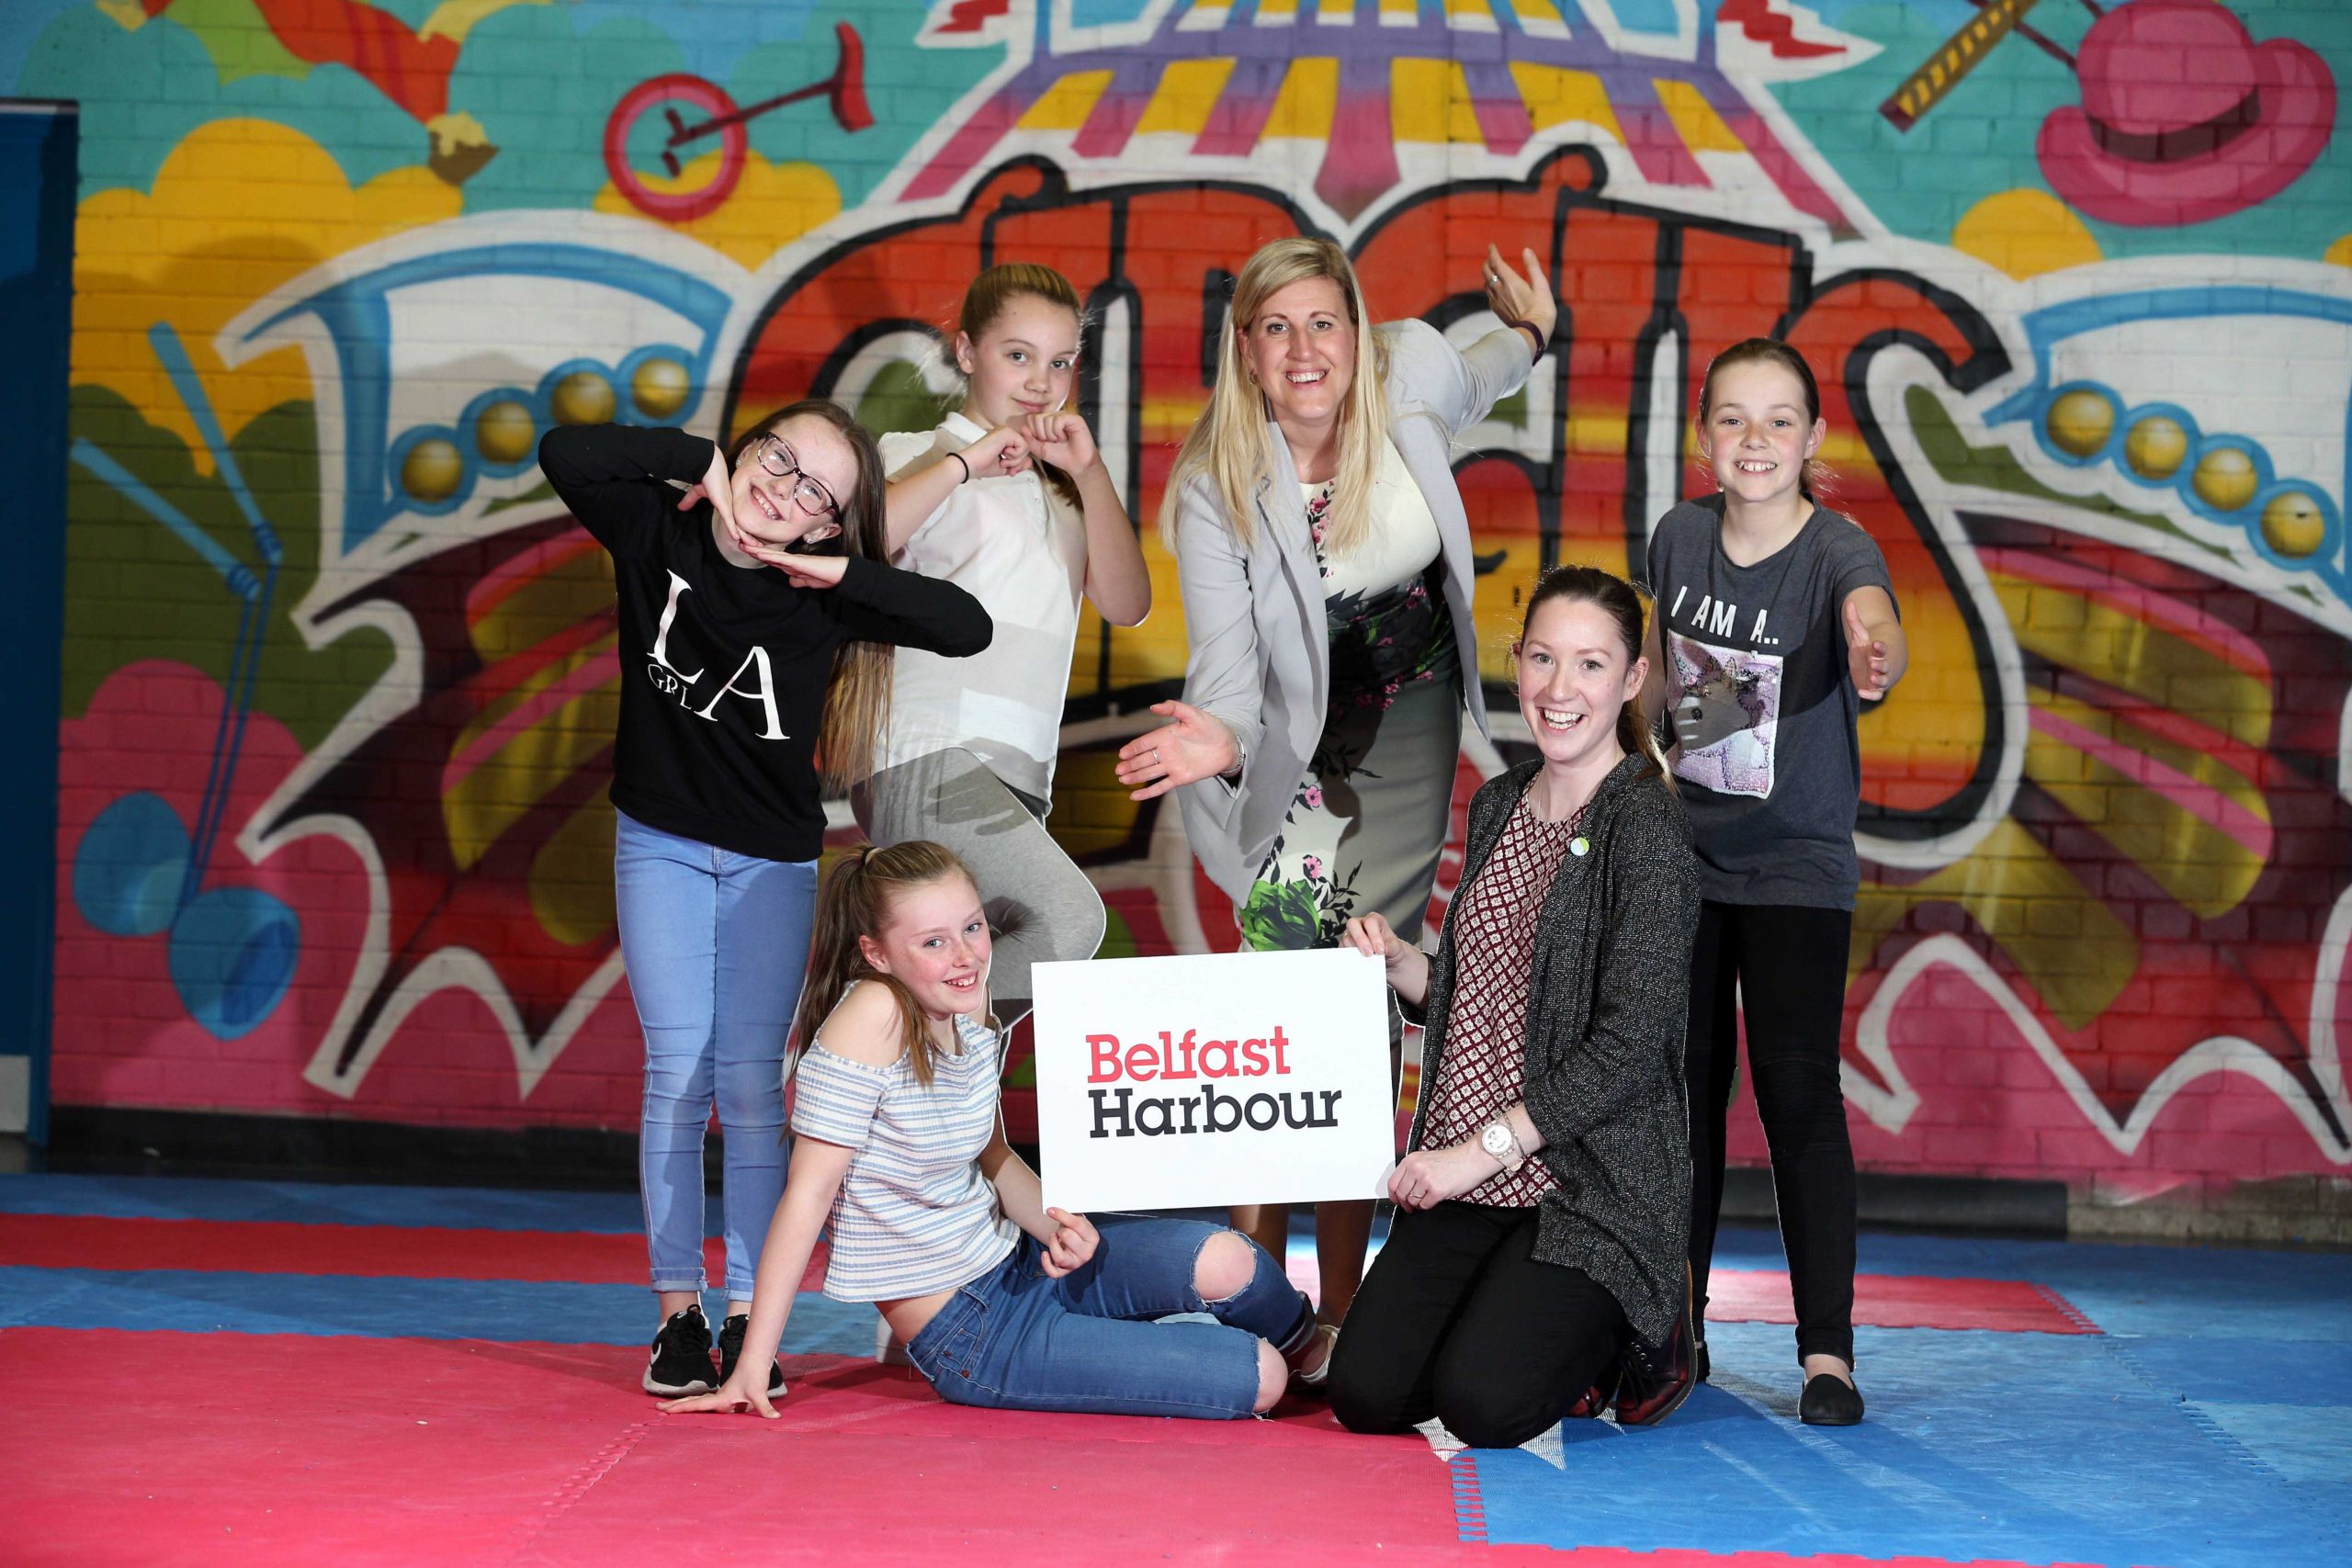 Belfast Harbour supports award-winning youth programme